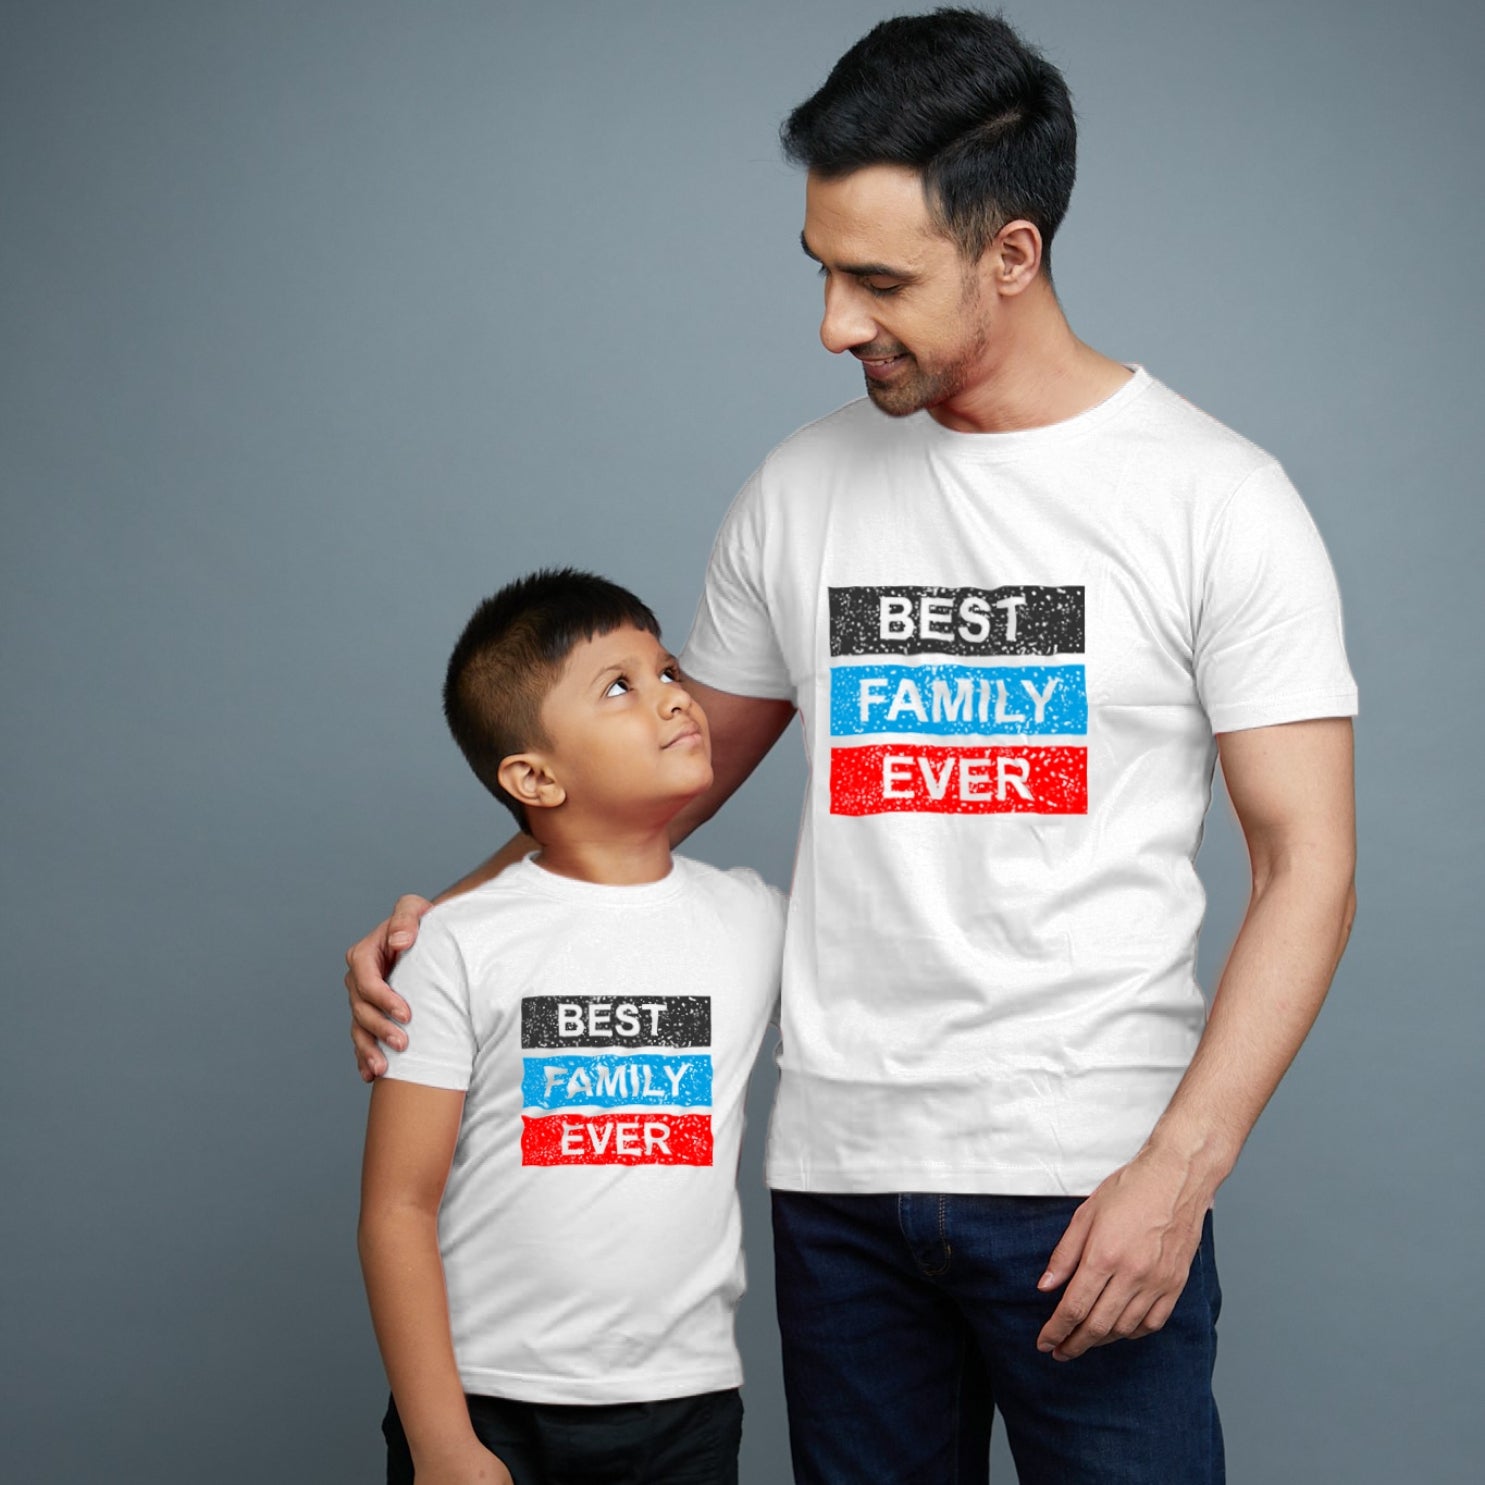 Family of 2 t shirt for Dad Son in White Colour- Best Family Ever